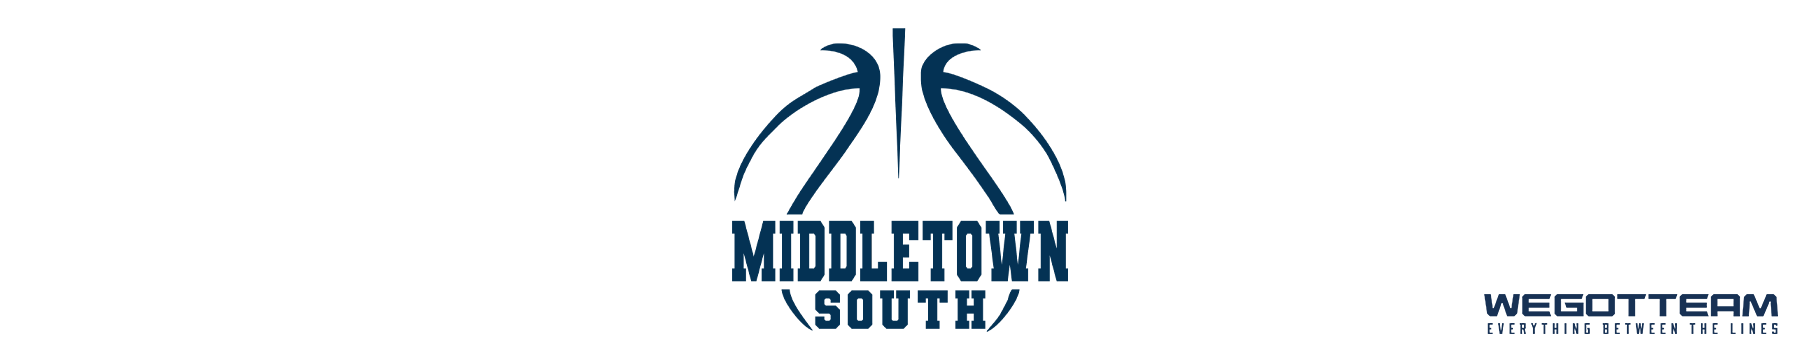 Middletown South